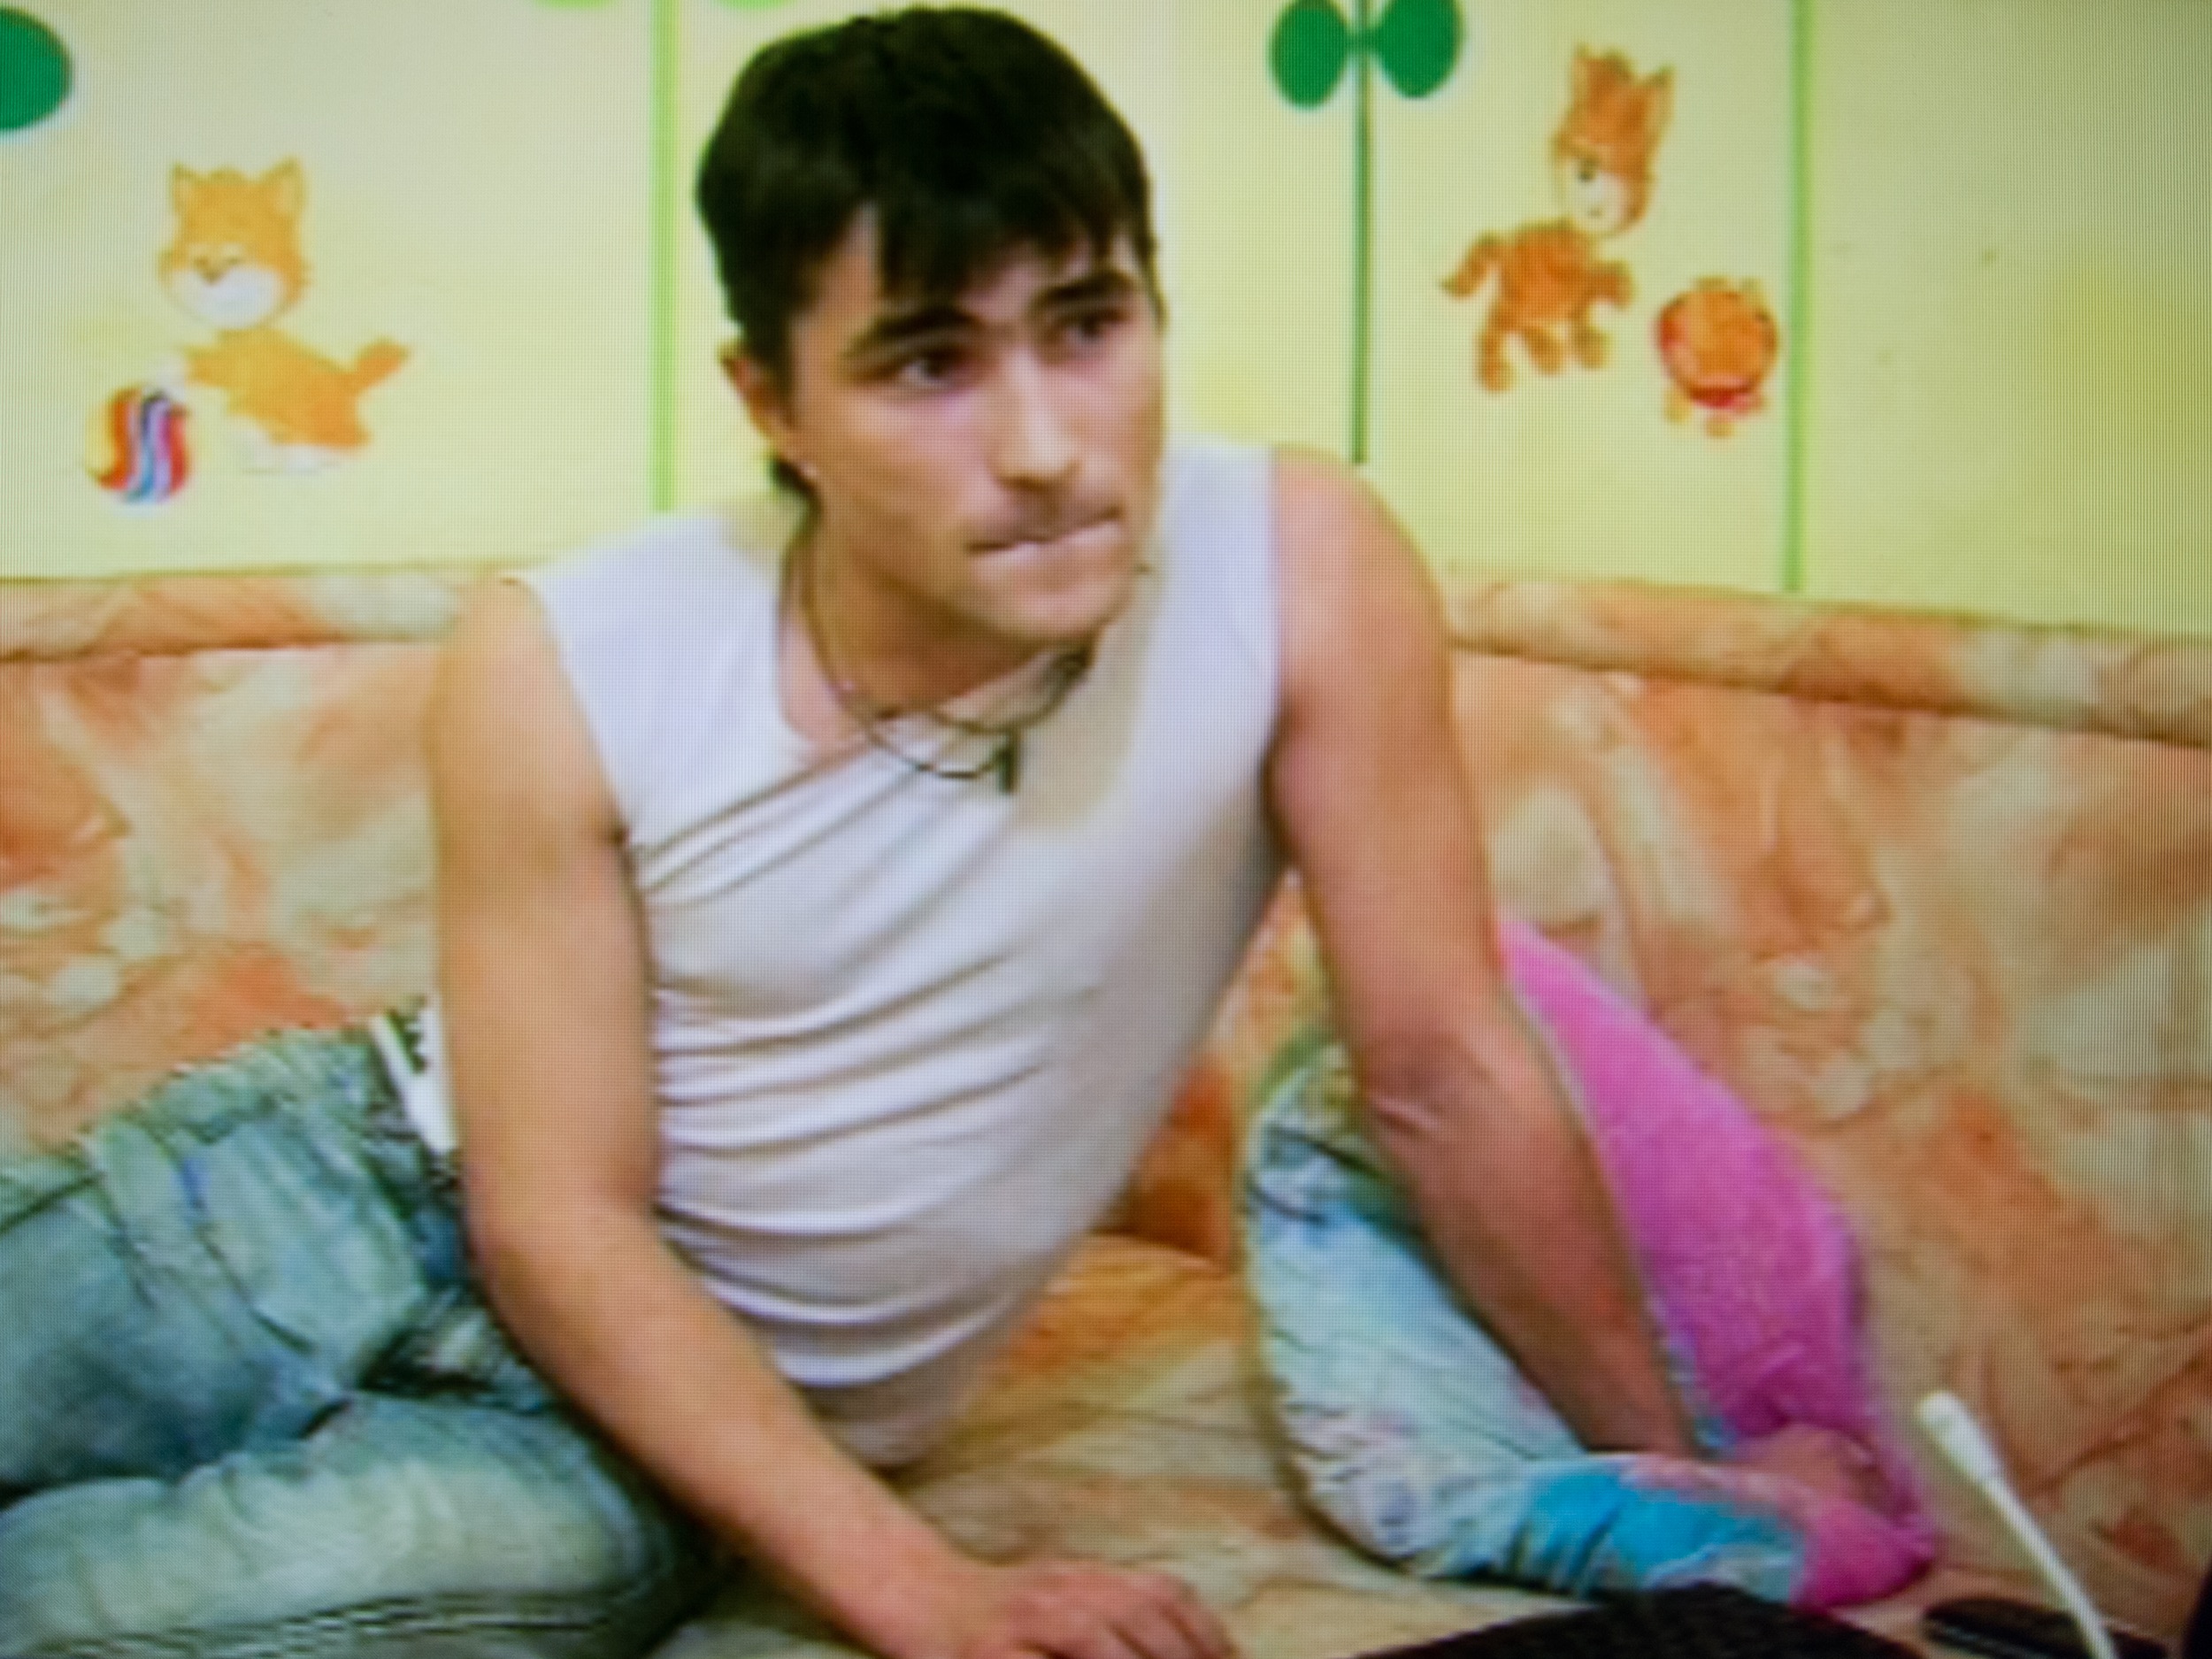 A male stripper in white tanktop sits on an orange marbled sofa in front of a green wall with cat cartoons